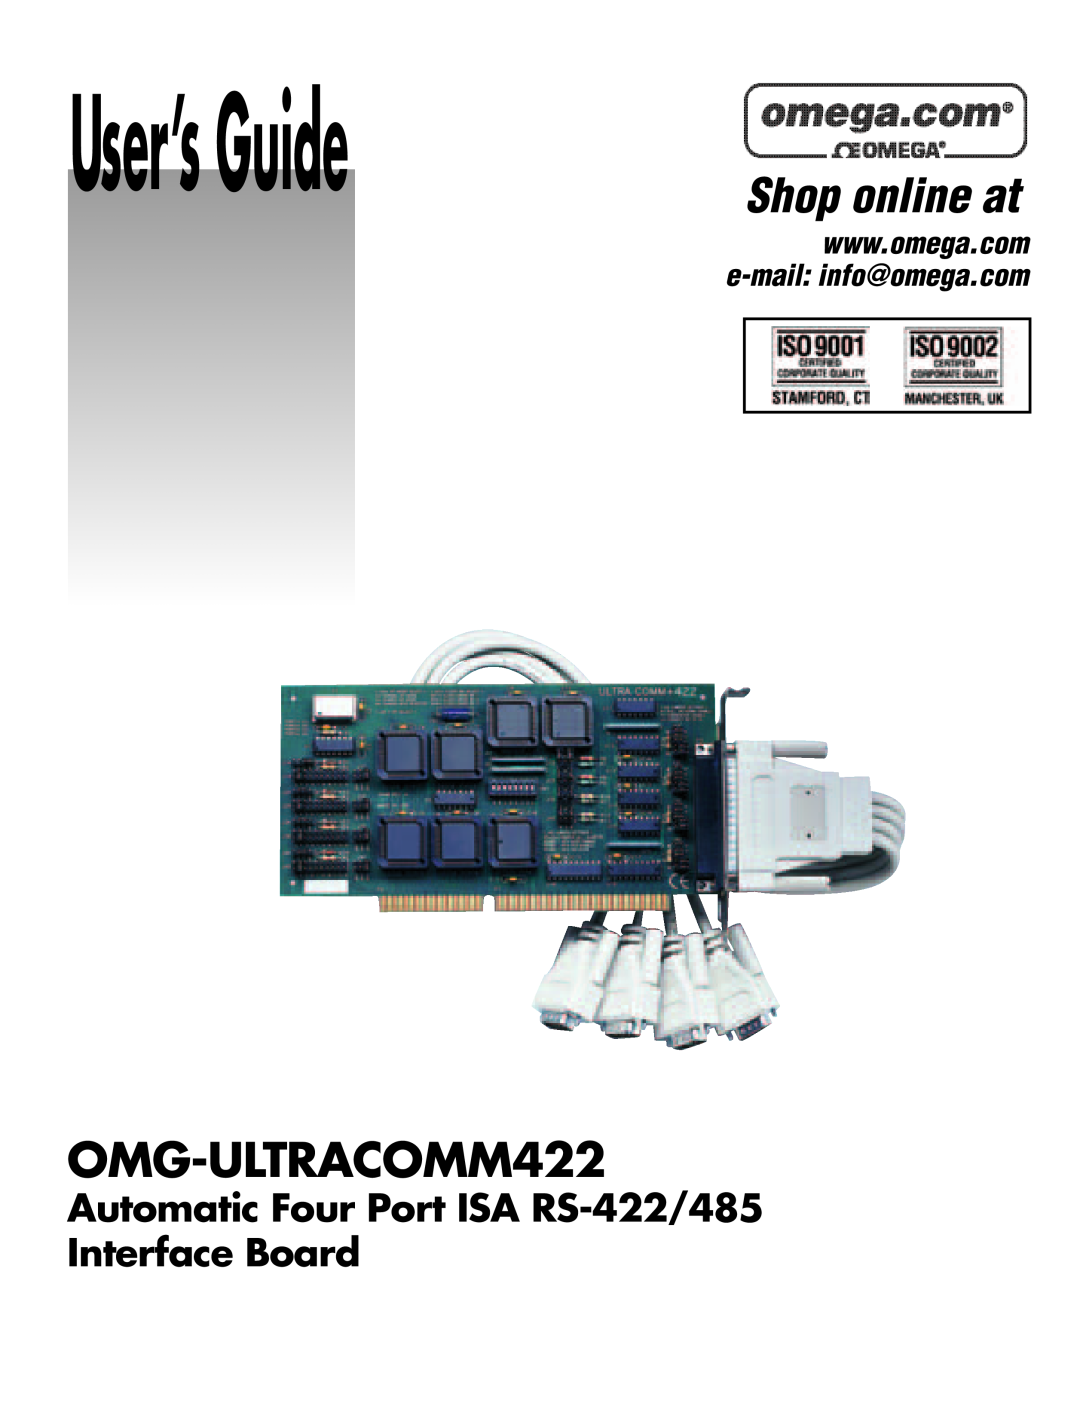 Omega Engineering manual Automatic Four Port ISA RS-422/485 Interface Board, User’sGuide, Shop online at 